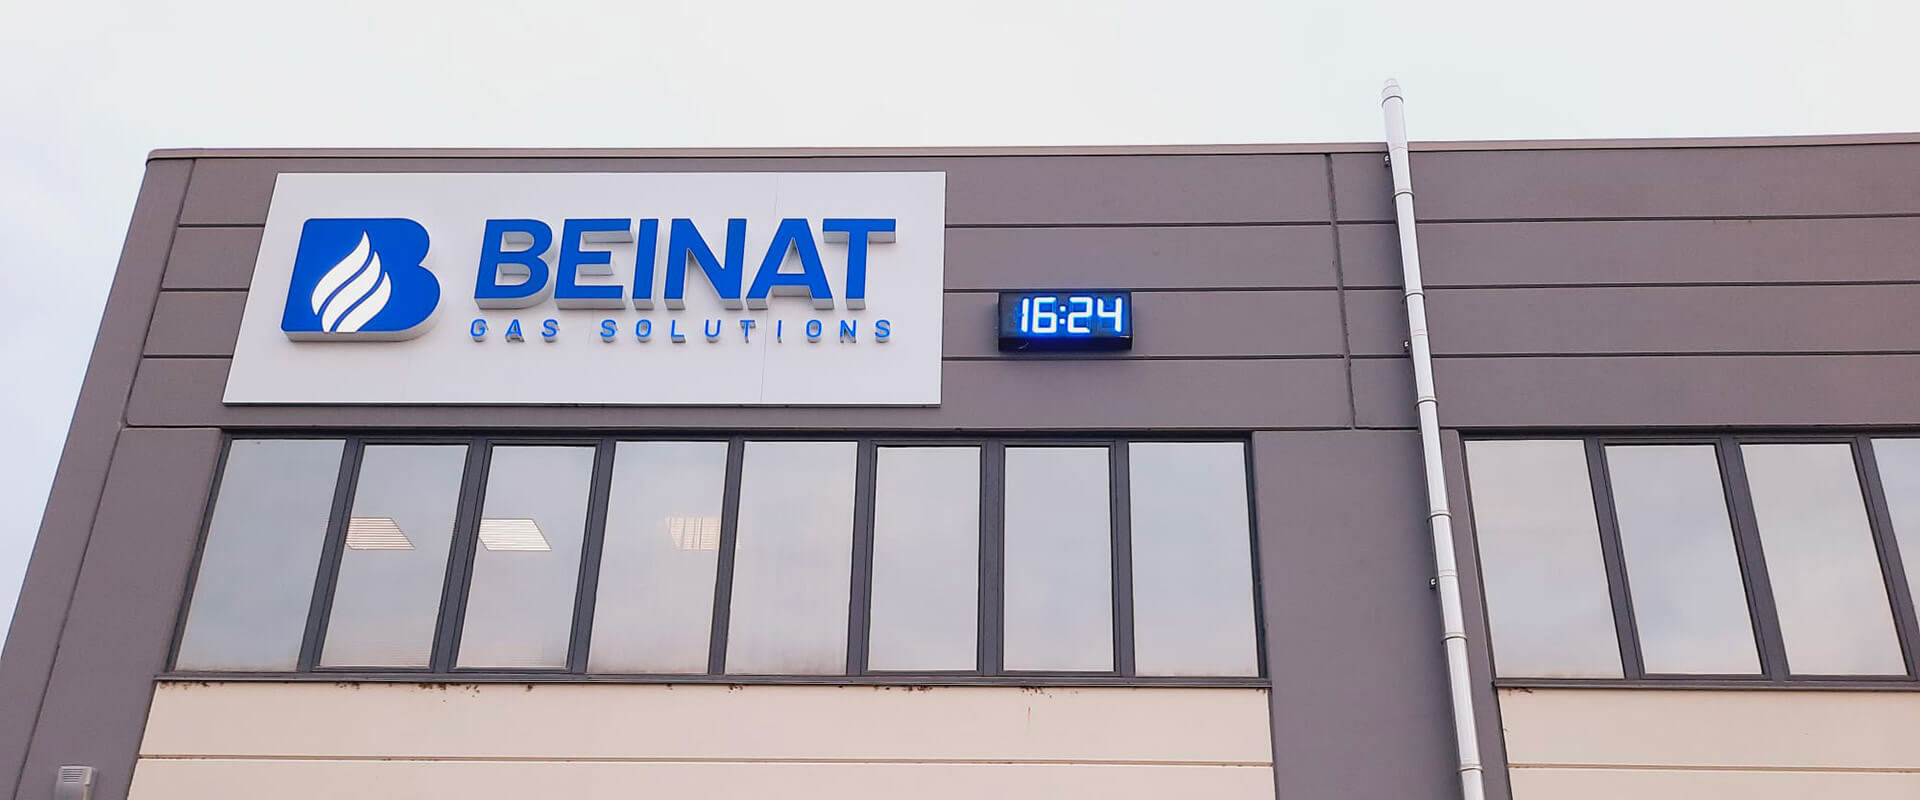 Merry Christmas and Happy New Year from Beinat!